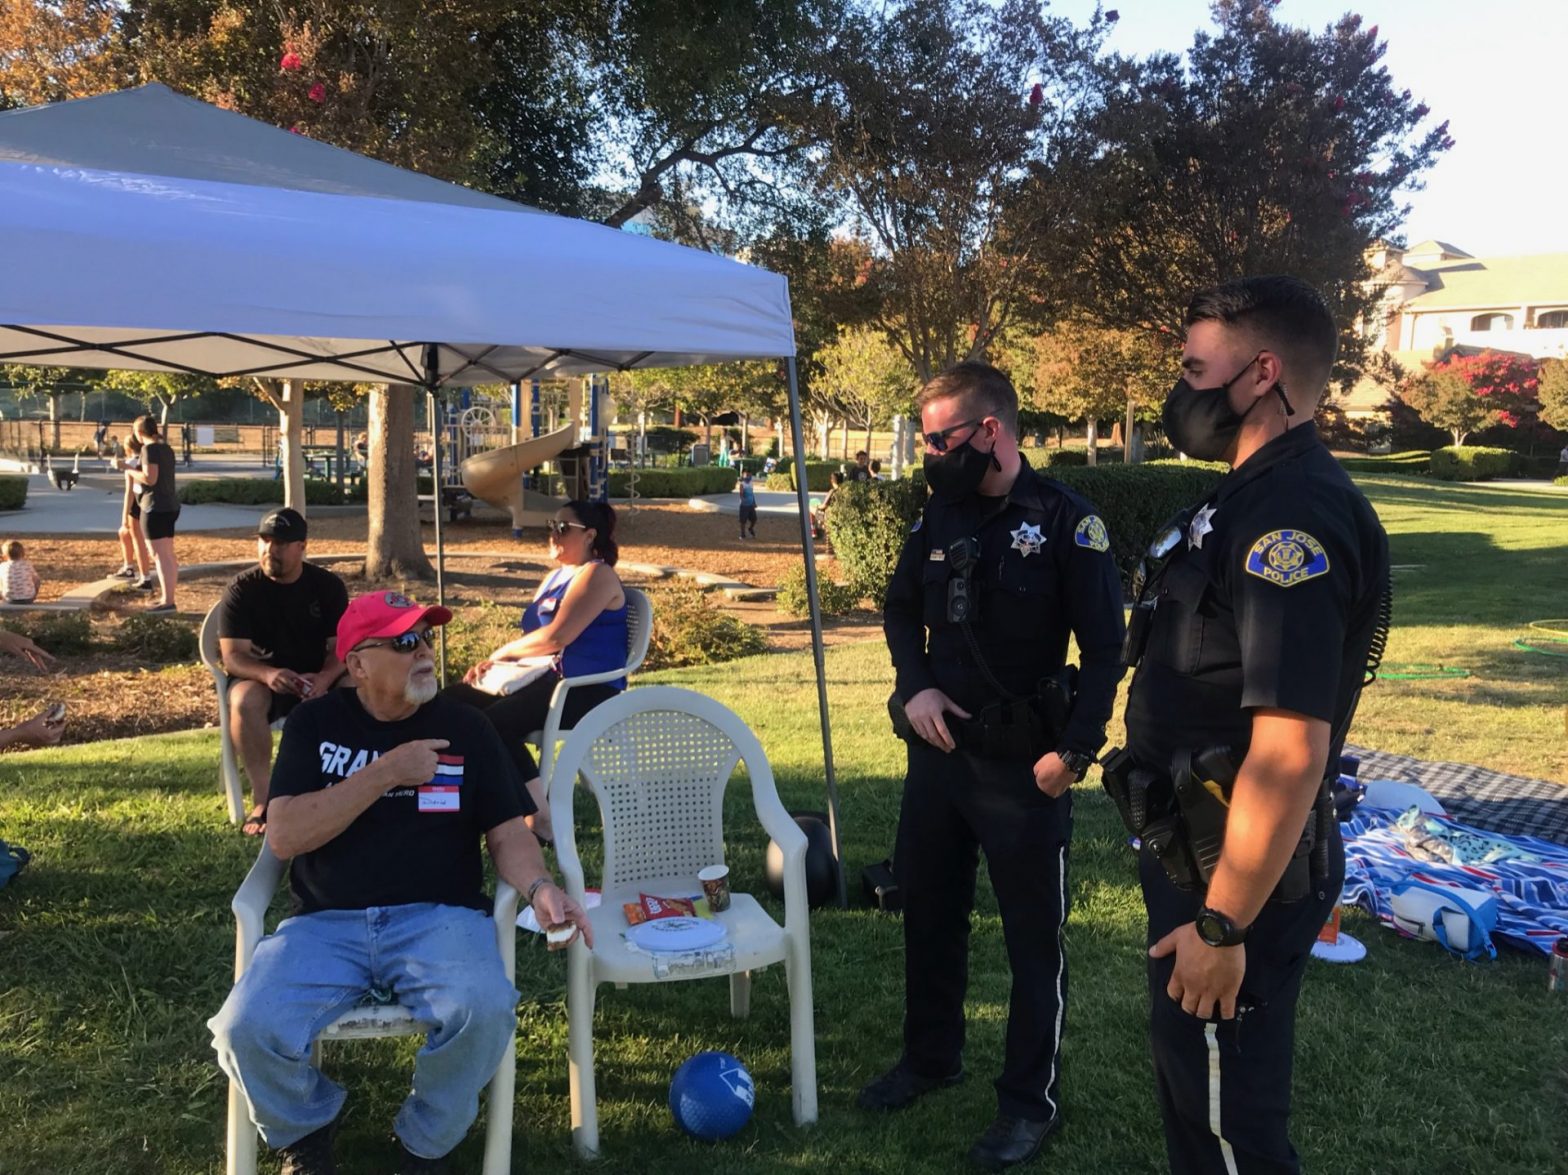 Ice cream and “social” are back together at National Night Out